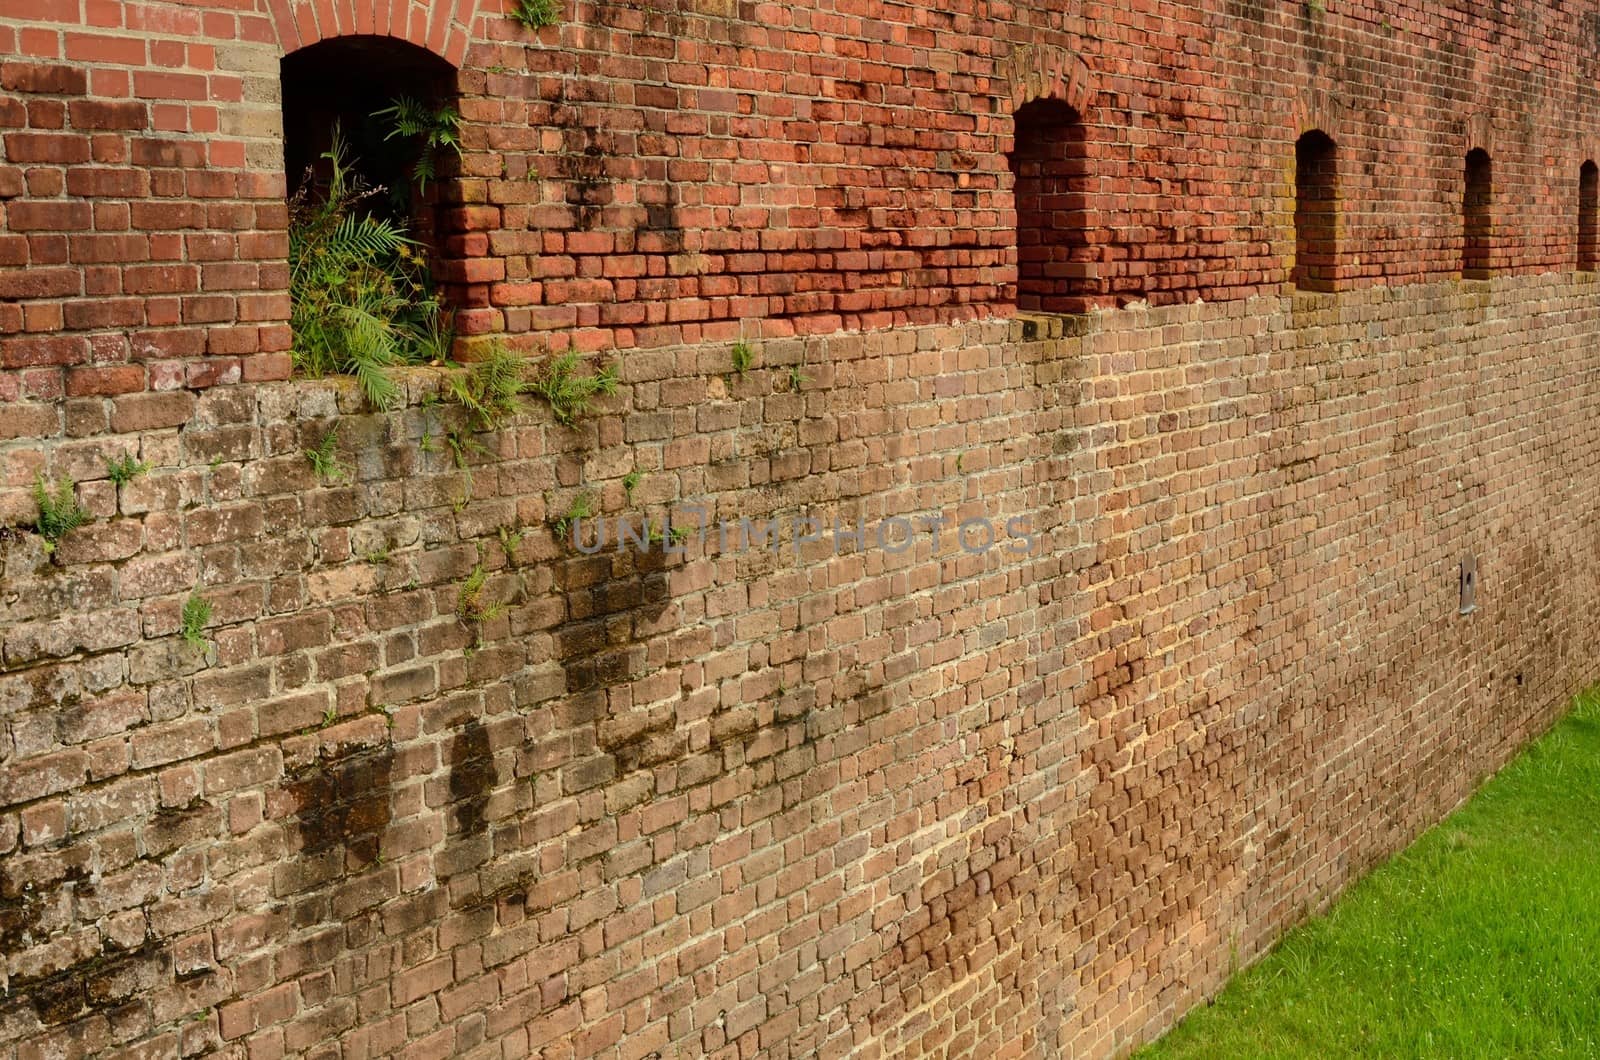 A brick wall with gun portholes in a Civil War era fort, Fort Clinch, which can be seen in Florida at Fort Clinch State Park